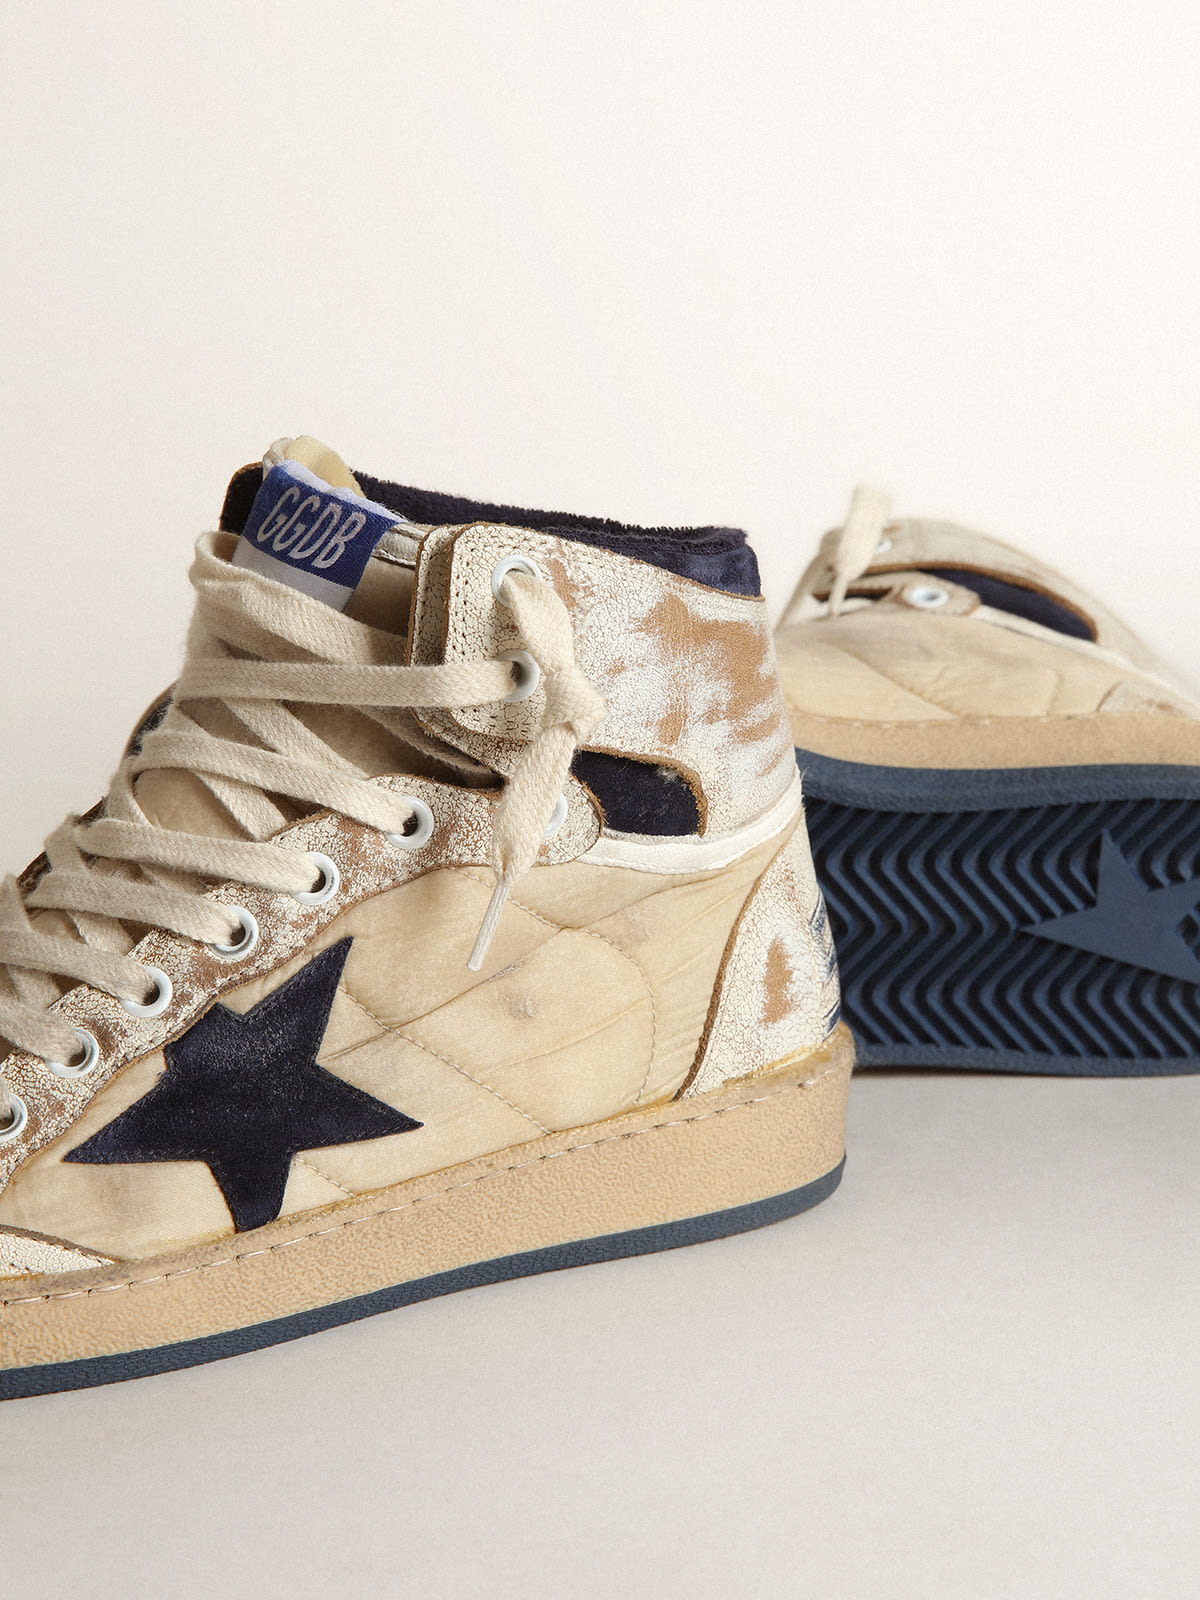 Golden Goose - Women’s Sky-Star in nylon and white leather with blue suede star in 